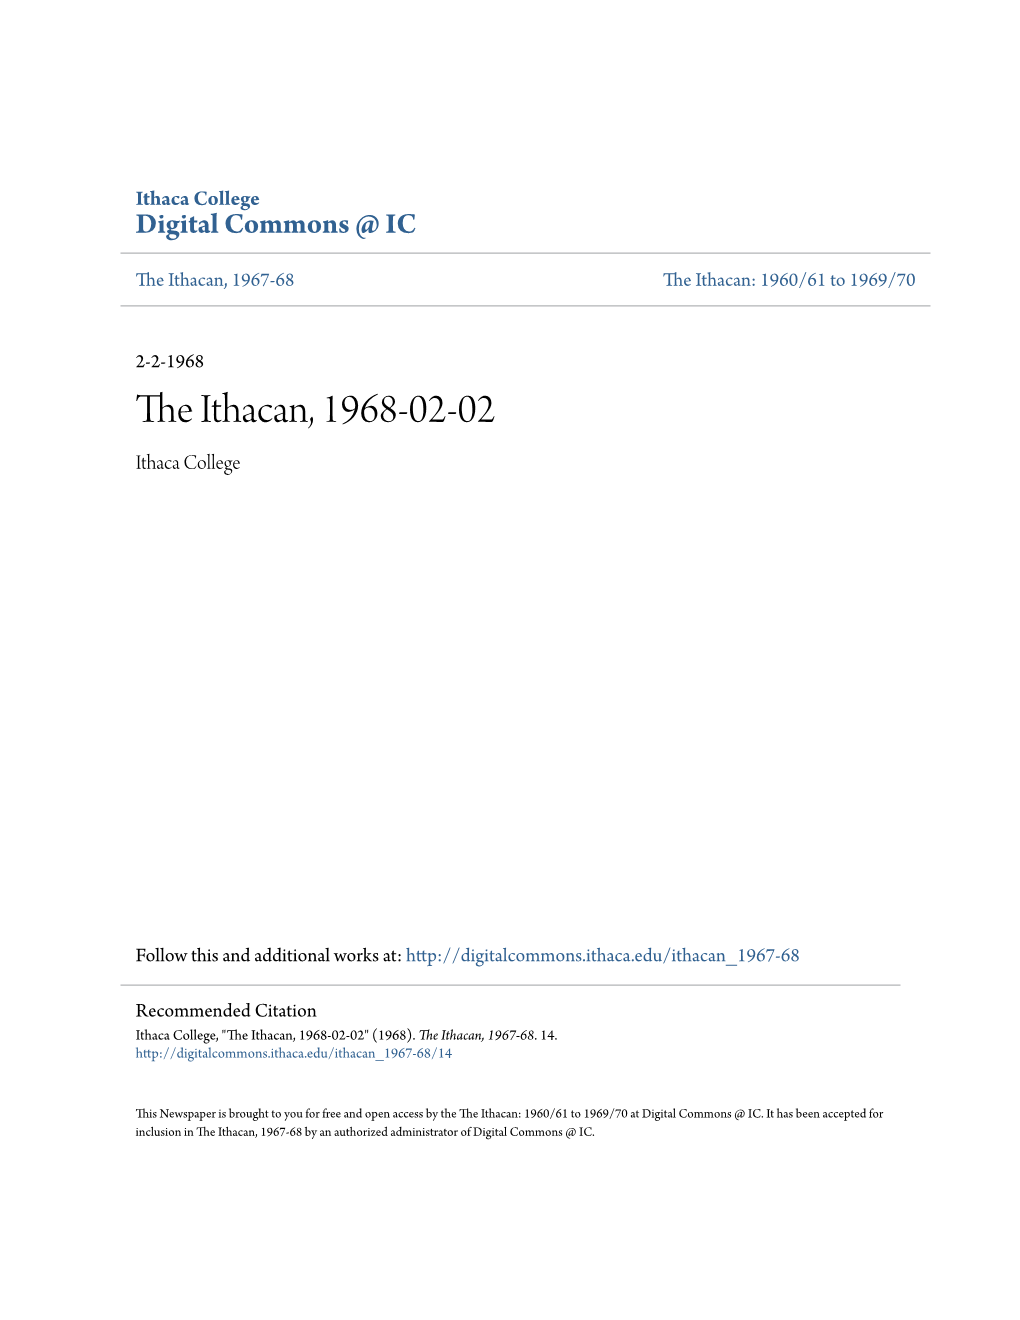 The Ithacan, 1968-02-02